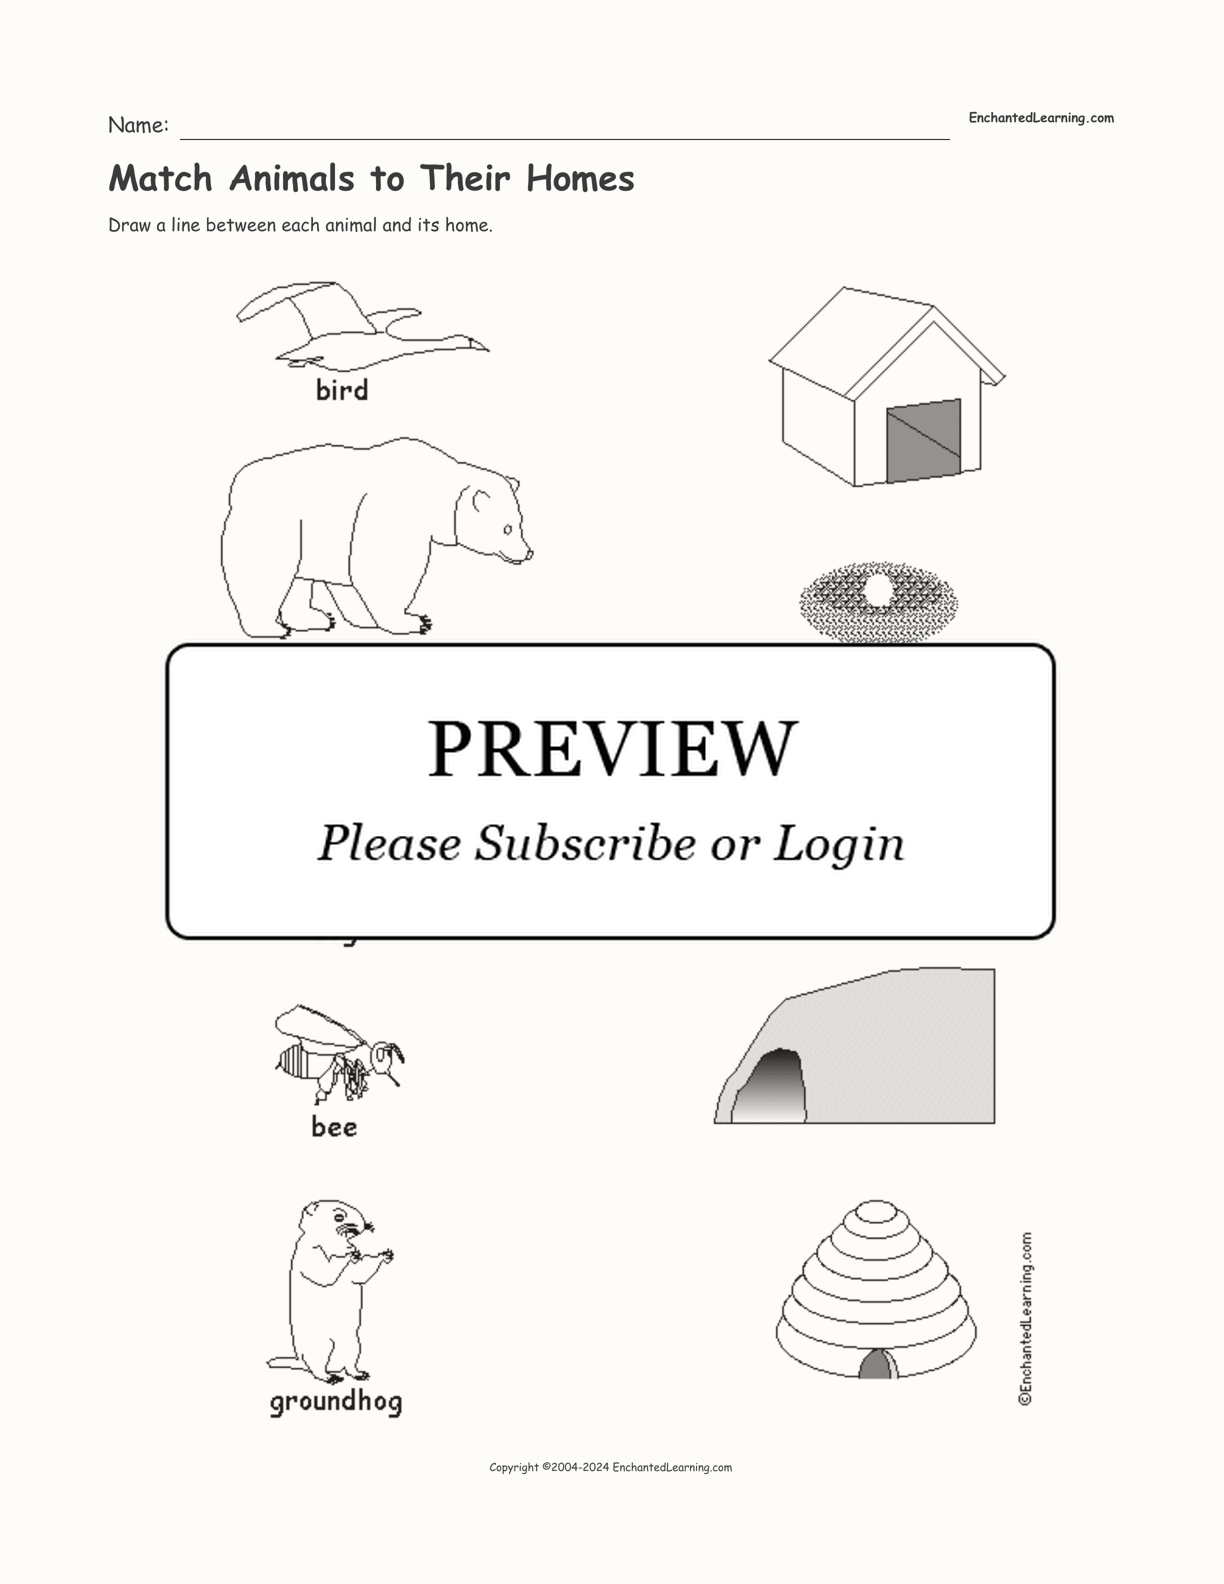 Match Animals to Their Homes interactive worksheet page 1